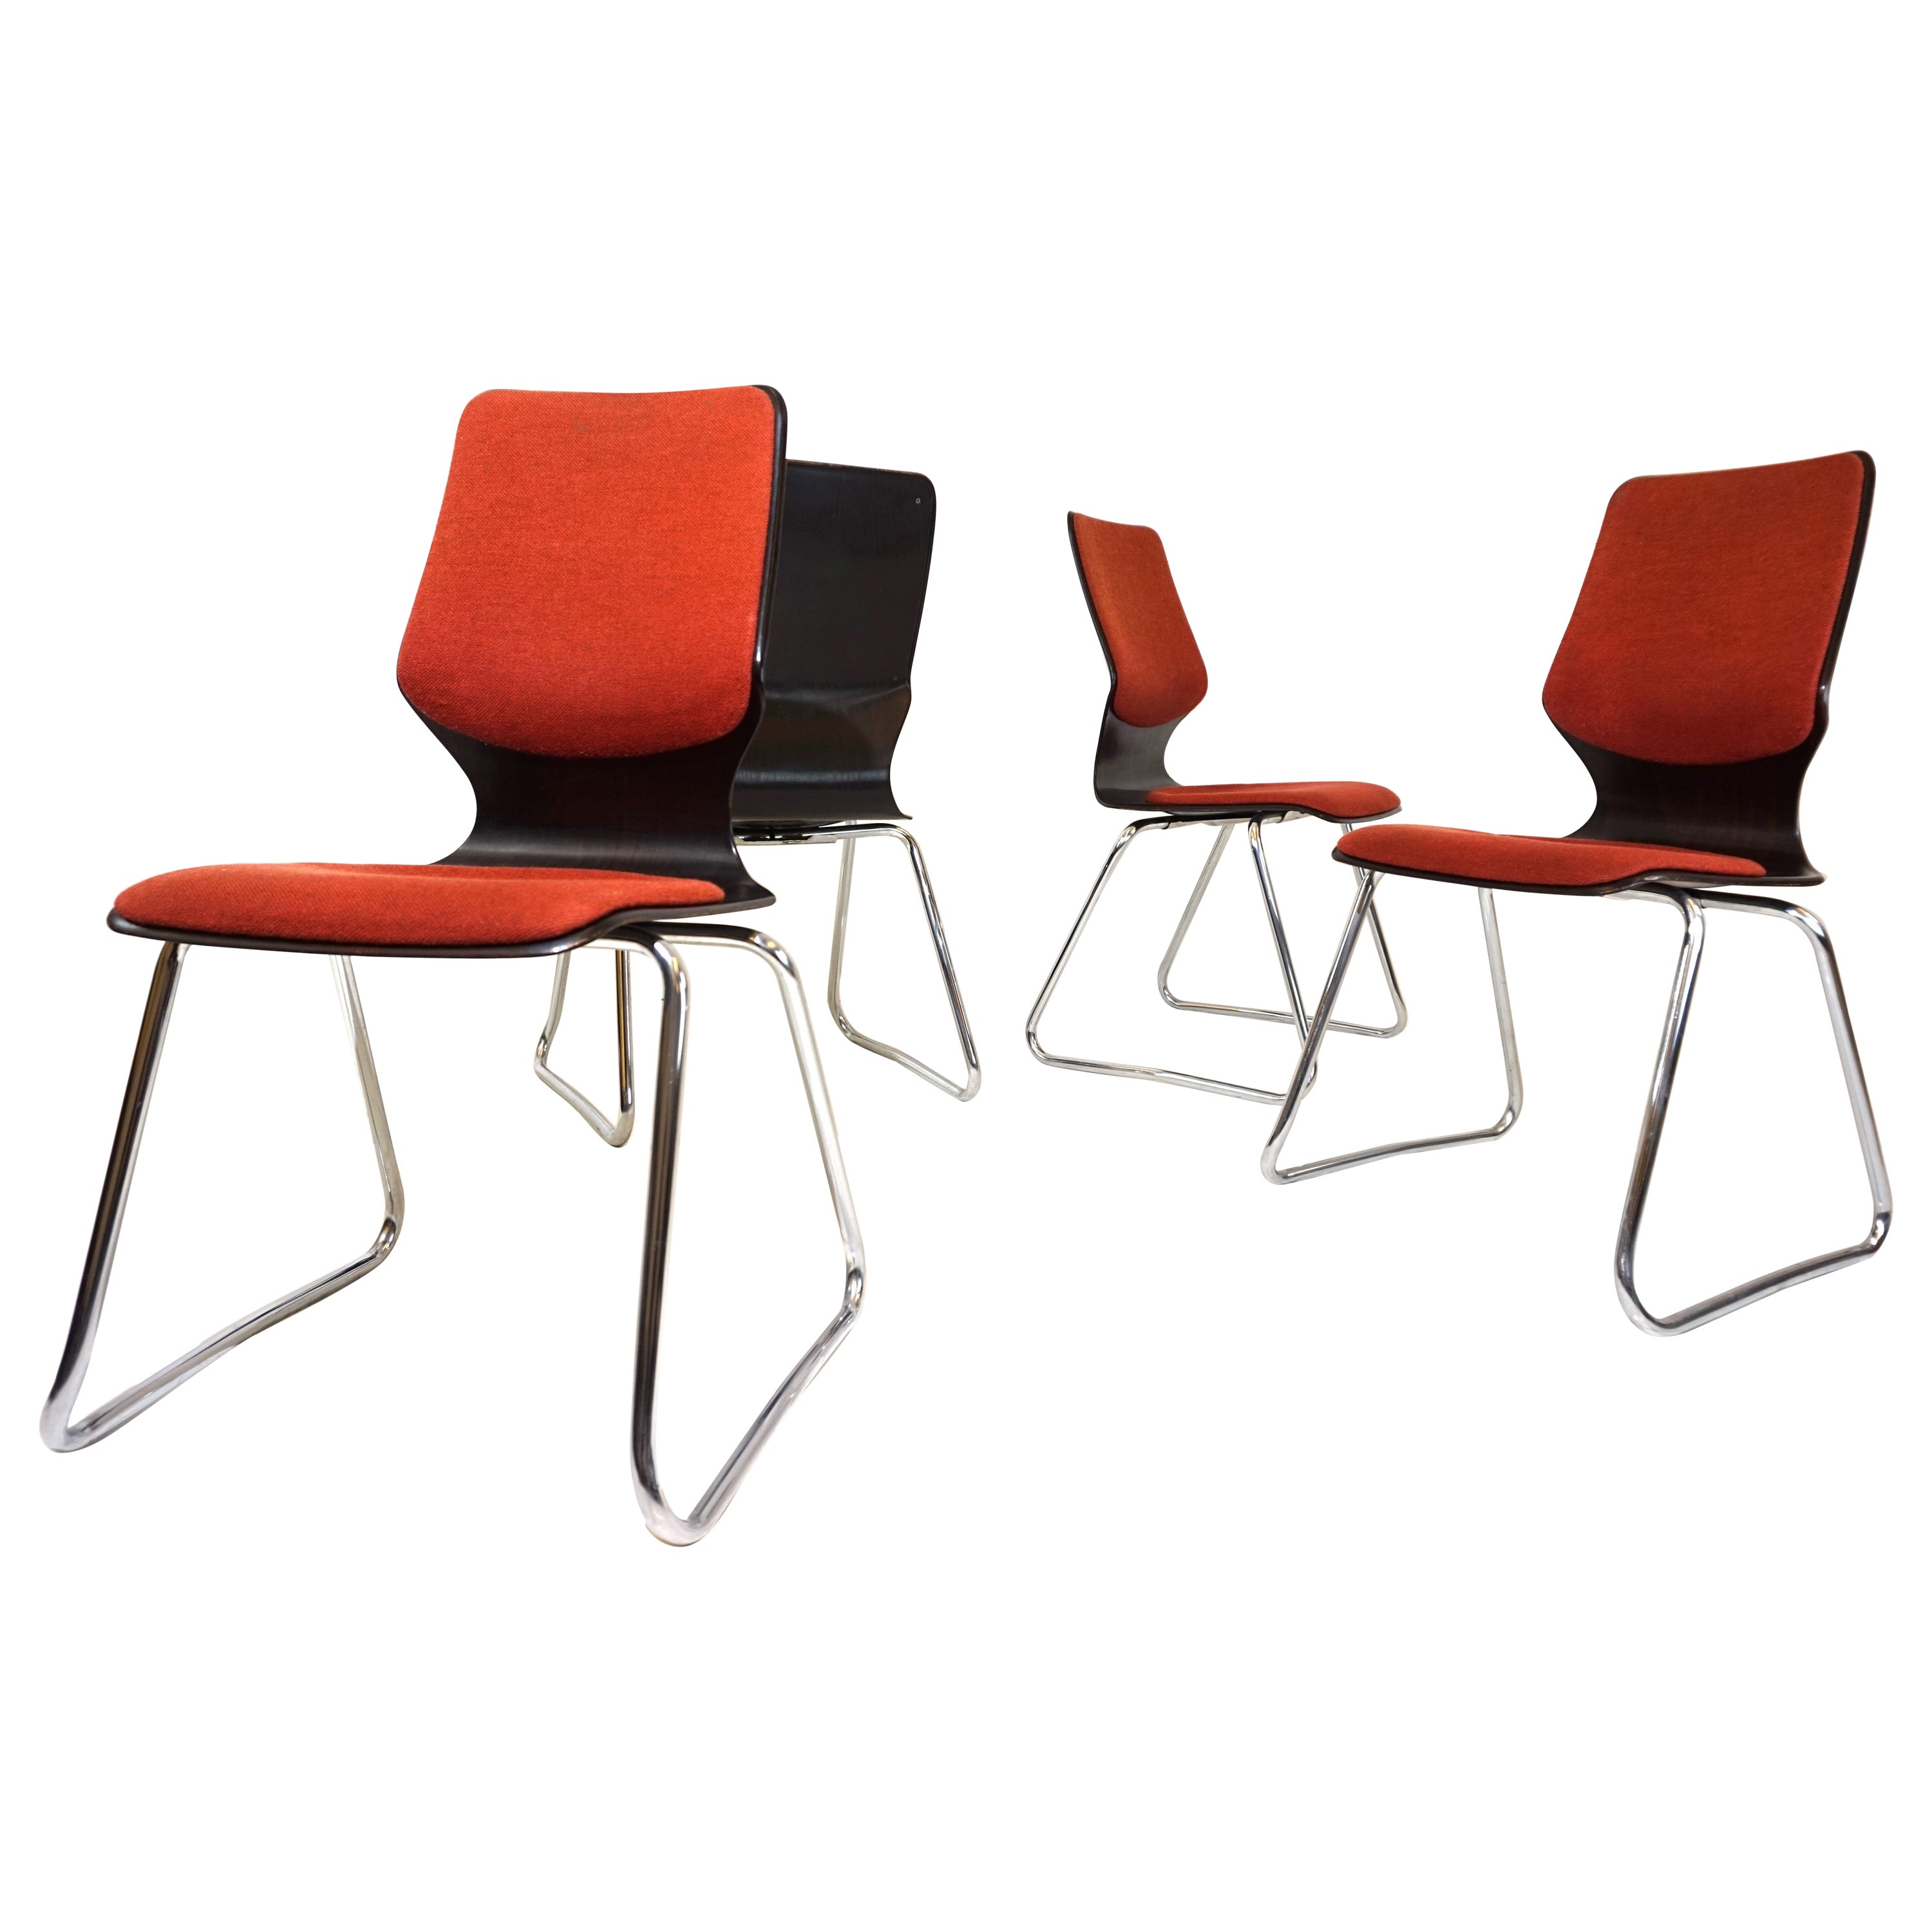 Flötotto set of 4 Pagholz chairs by Elmar Flötotto For Sale